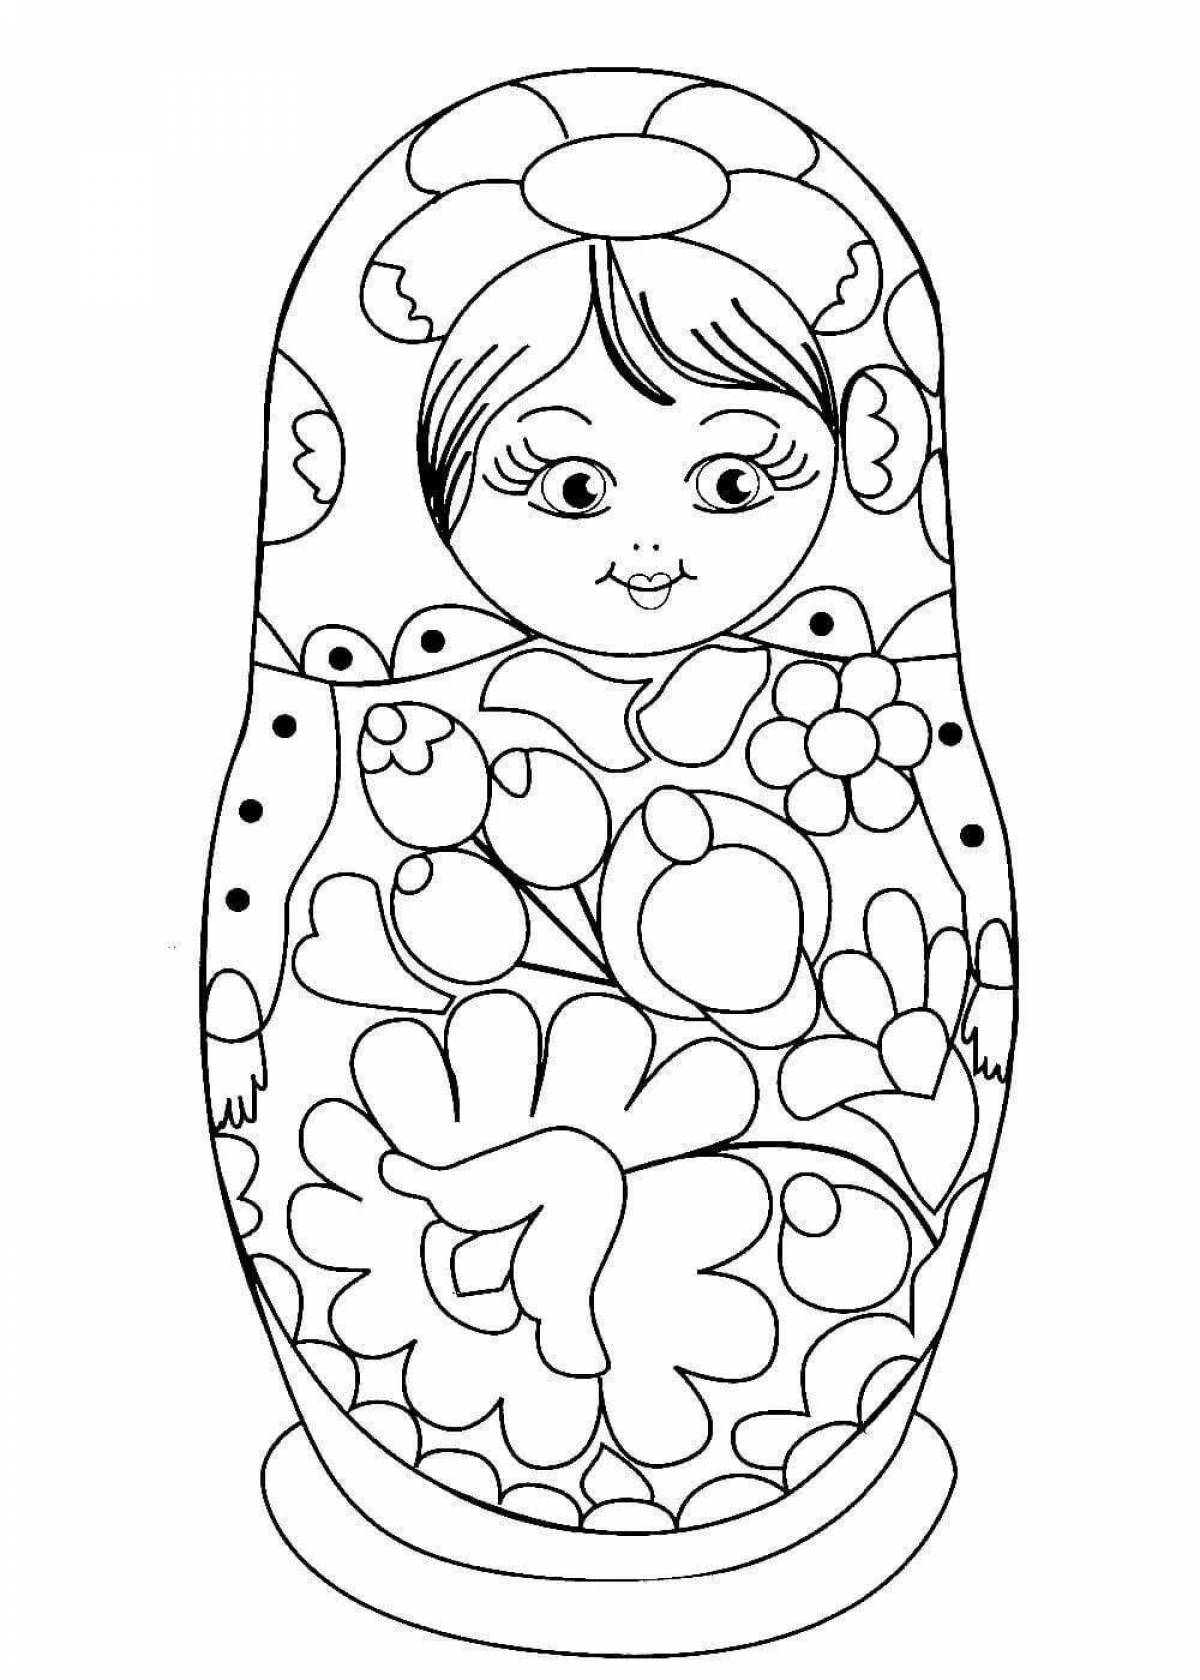 Adorable matryoshka coloring book for 4-5 year olds